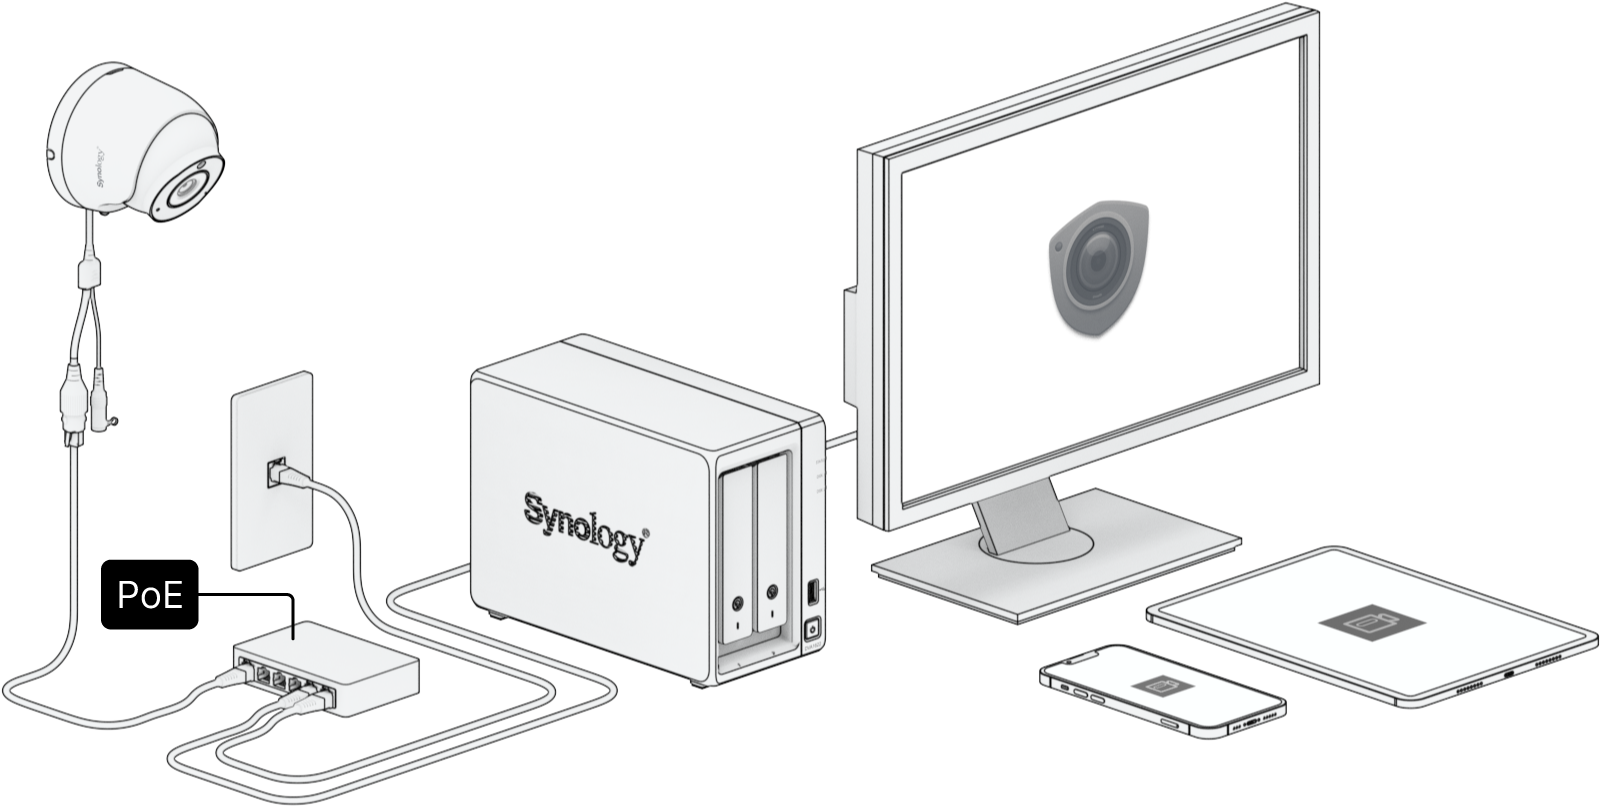 How to use Synology Cameras from Surveillance Station